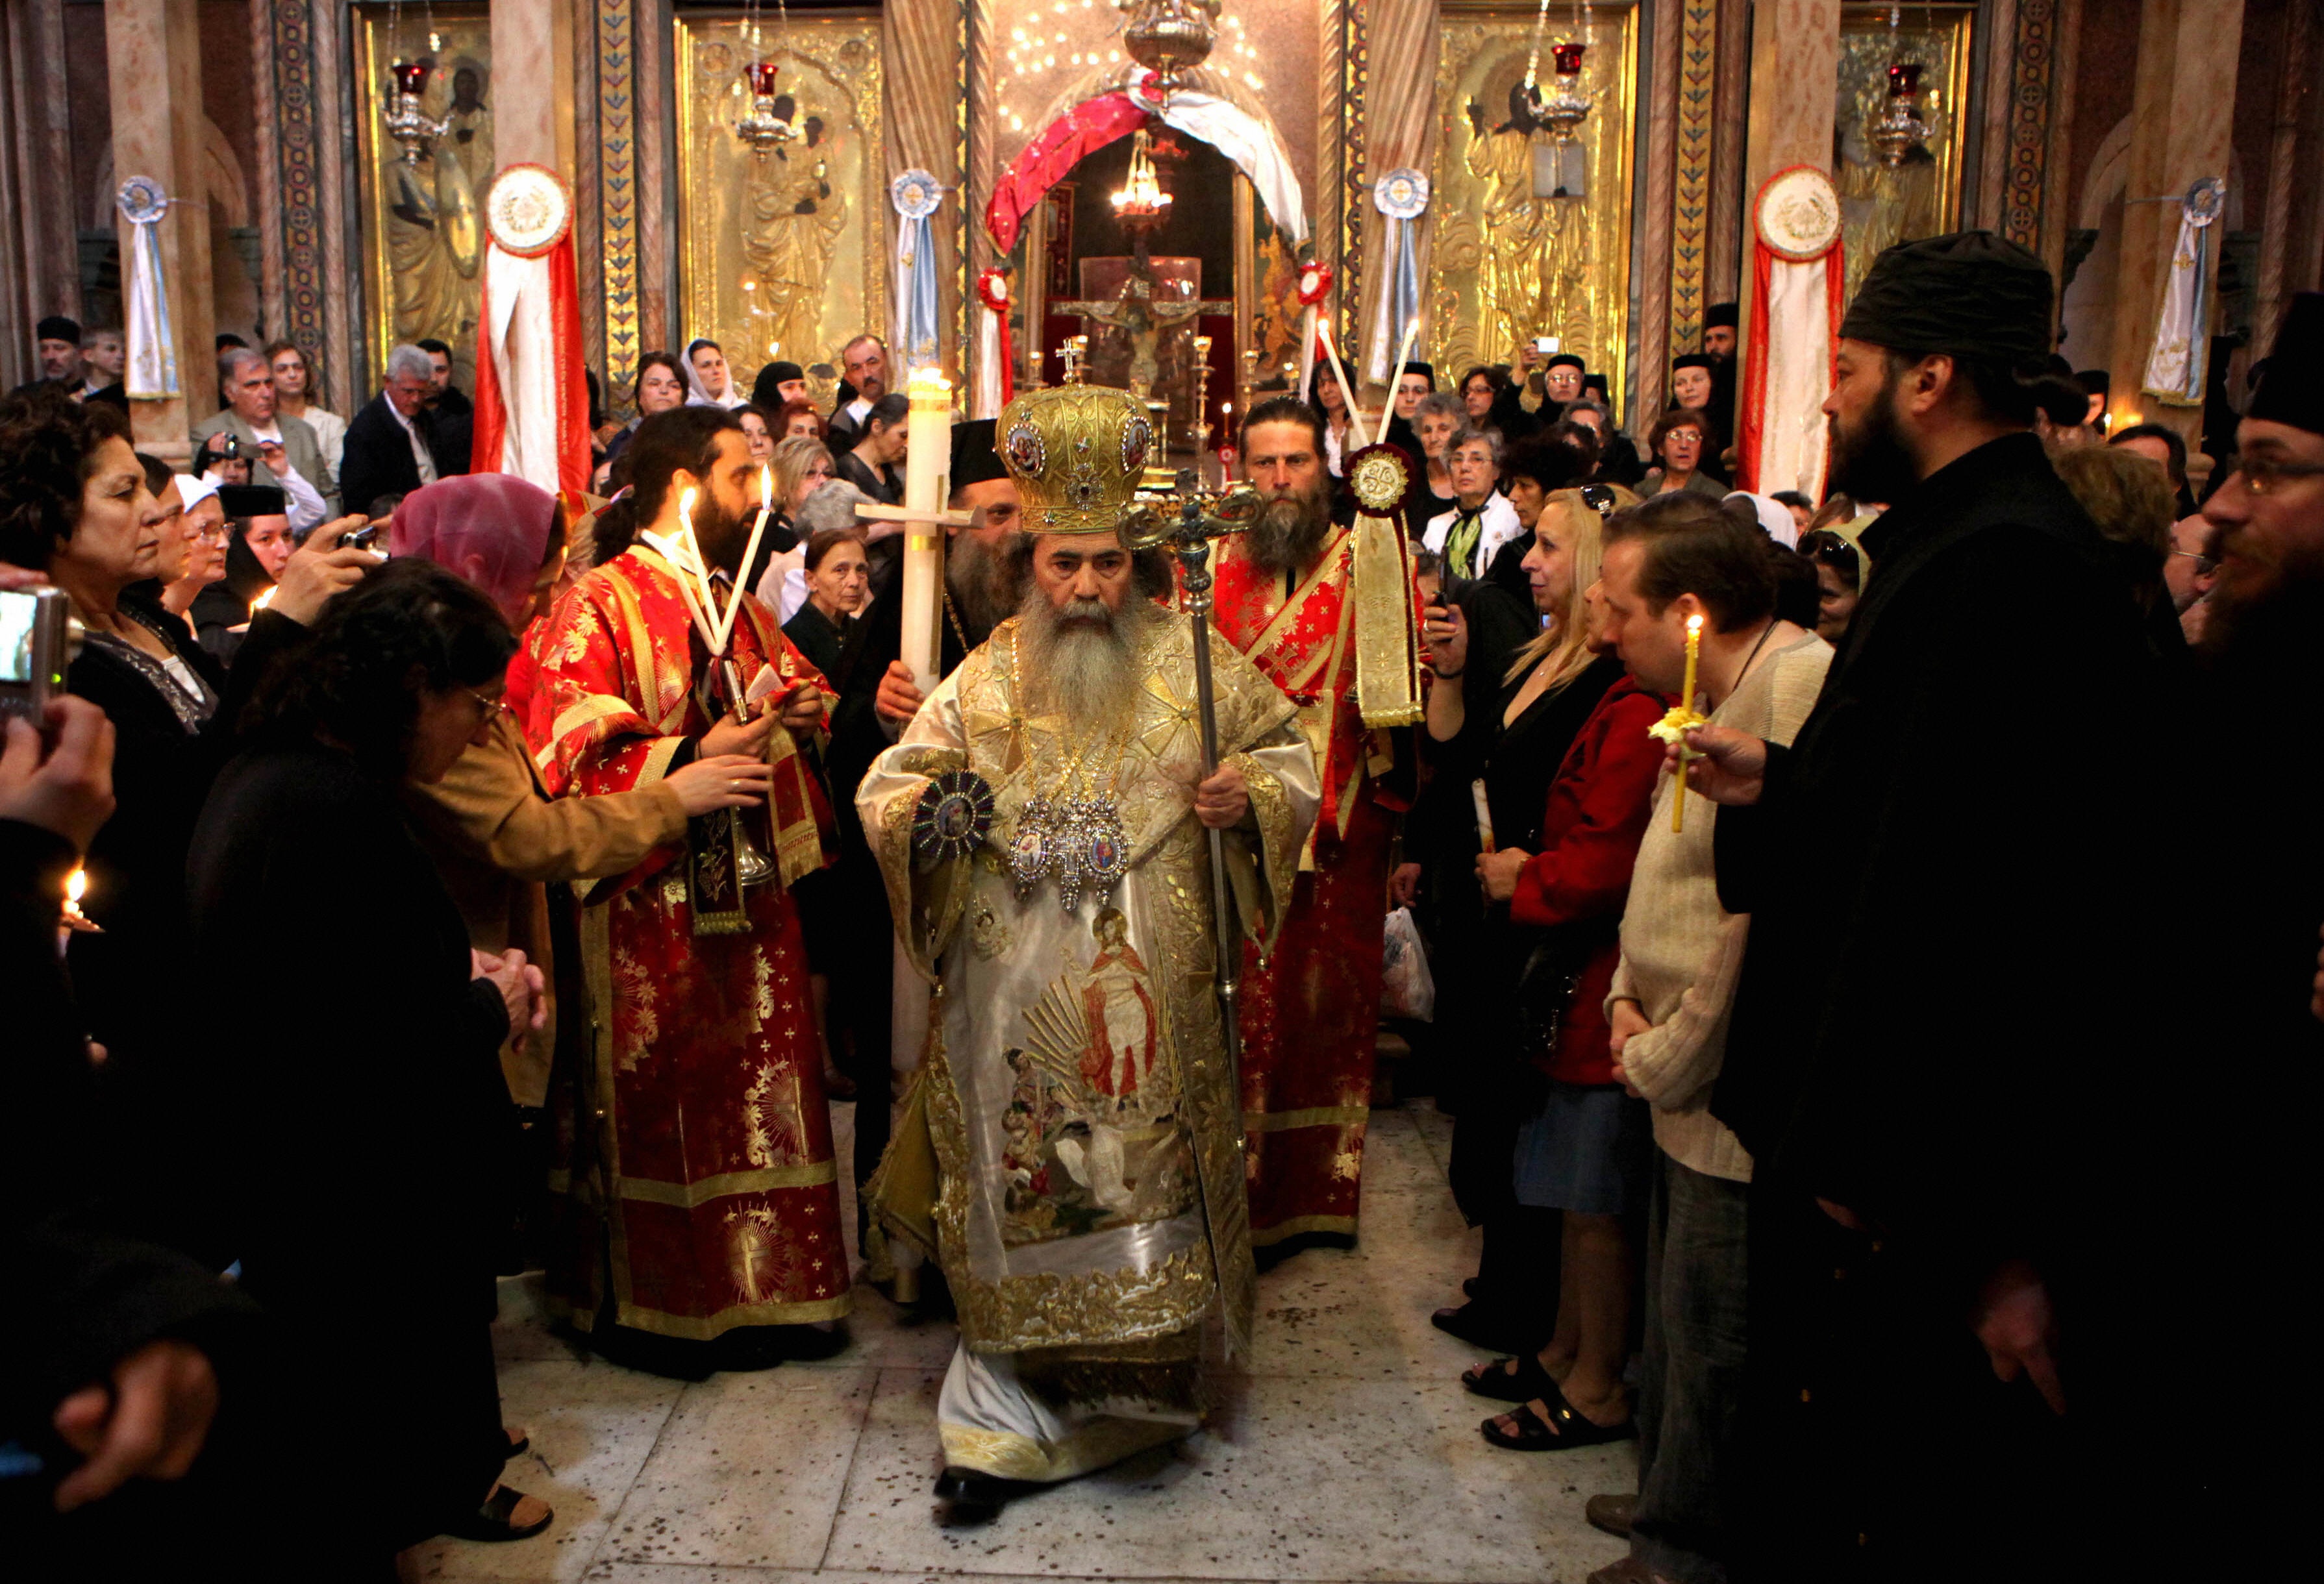 GALI TIBBON/AFP/Getty Images. Greek Orthodox Patriarch of Jerusalem Theophilos III leads the Easter Sunday mass at the Church of the Holy Sepulchre in Jerusalem's Old City on April 19, 2009, where according to Christian tradition Jesus Christ rose on the third day following his crucifixion. Easter celebrates the Resurrection of Christ after his crucifixion on Good Friday.